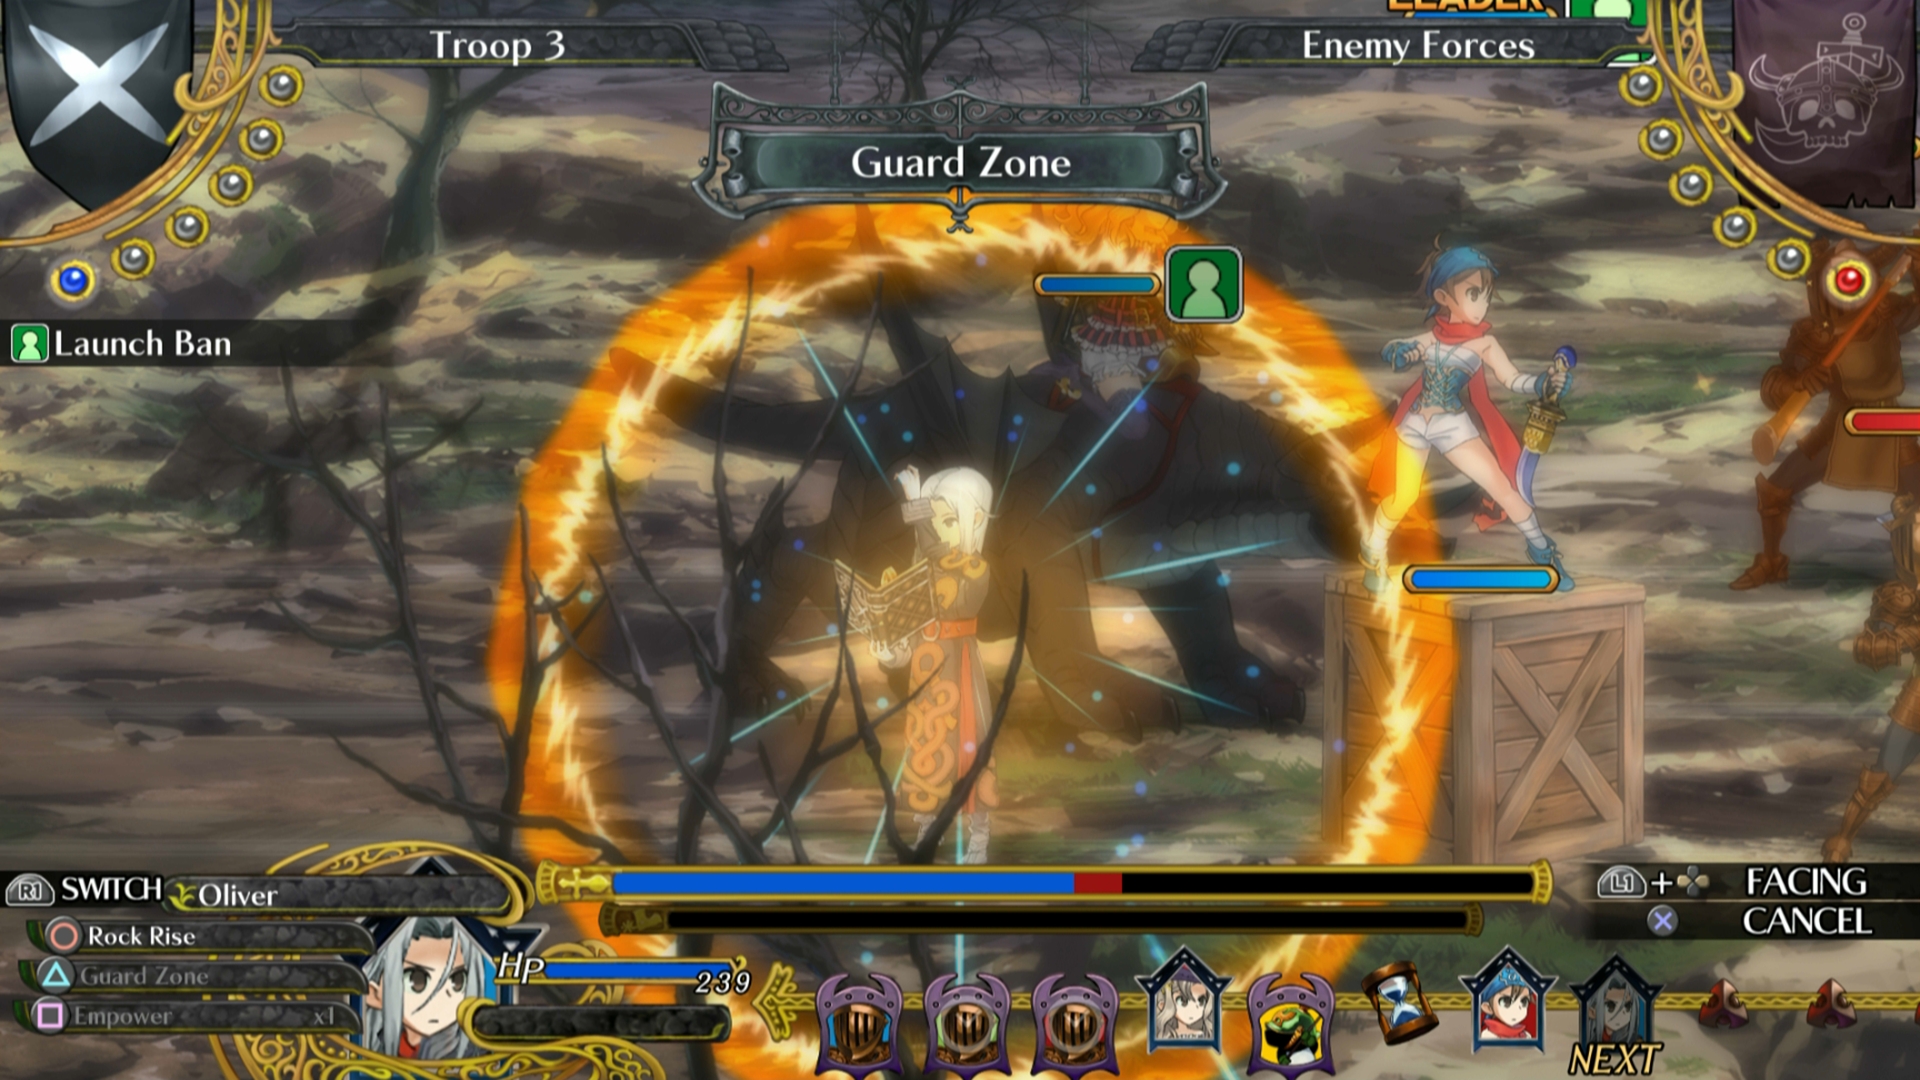 Grand Kingdom Preview - Get A Look At The Character Classes In The